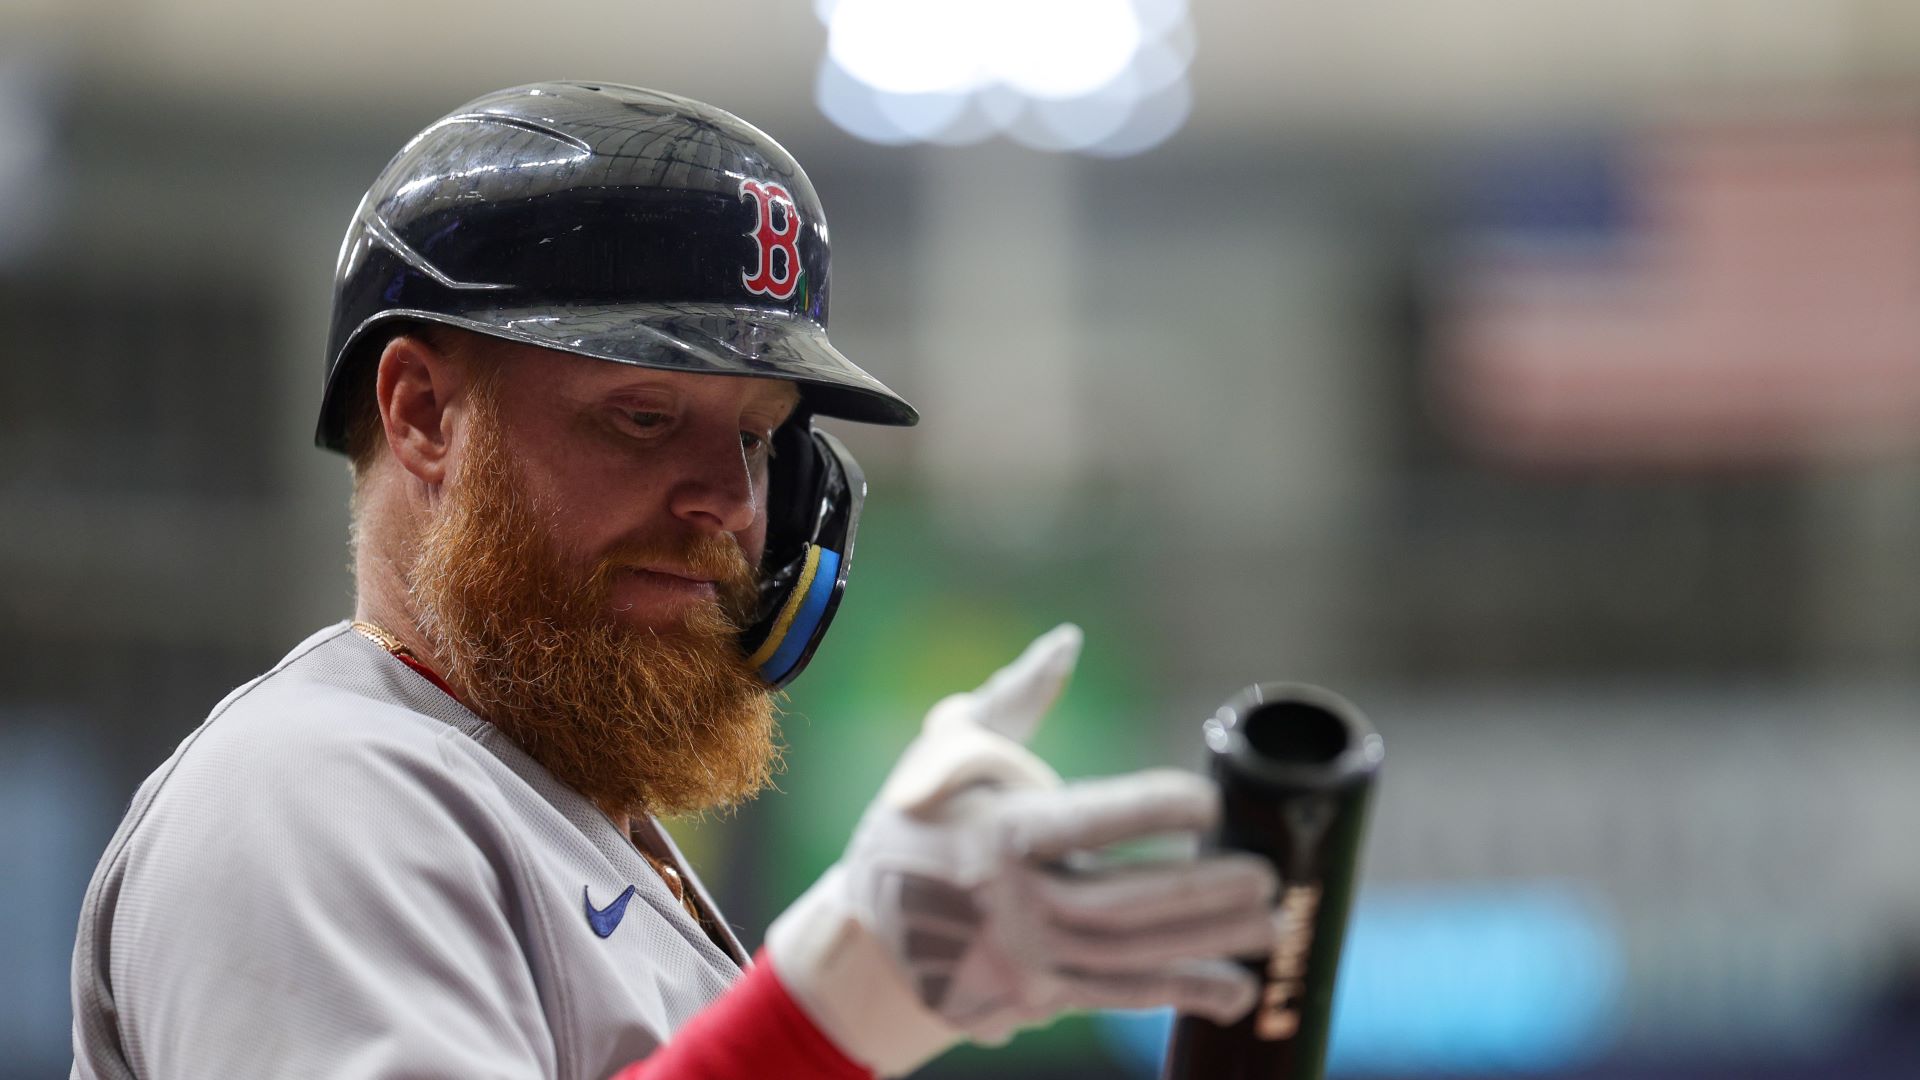 Justin Turner, Trevor Story Weigh In On Red Sox Parting With Chaim Bloom